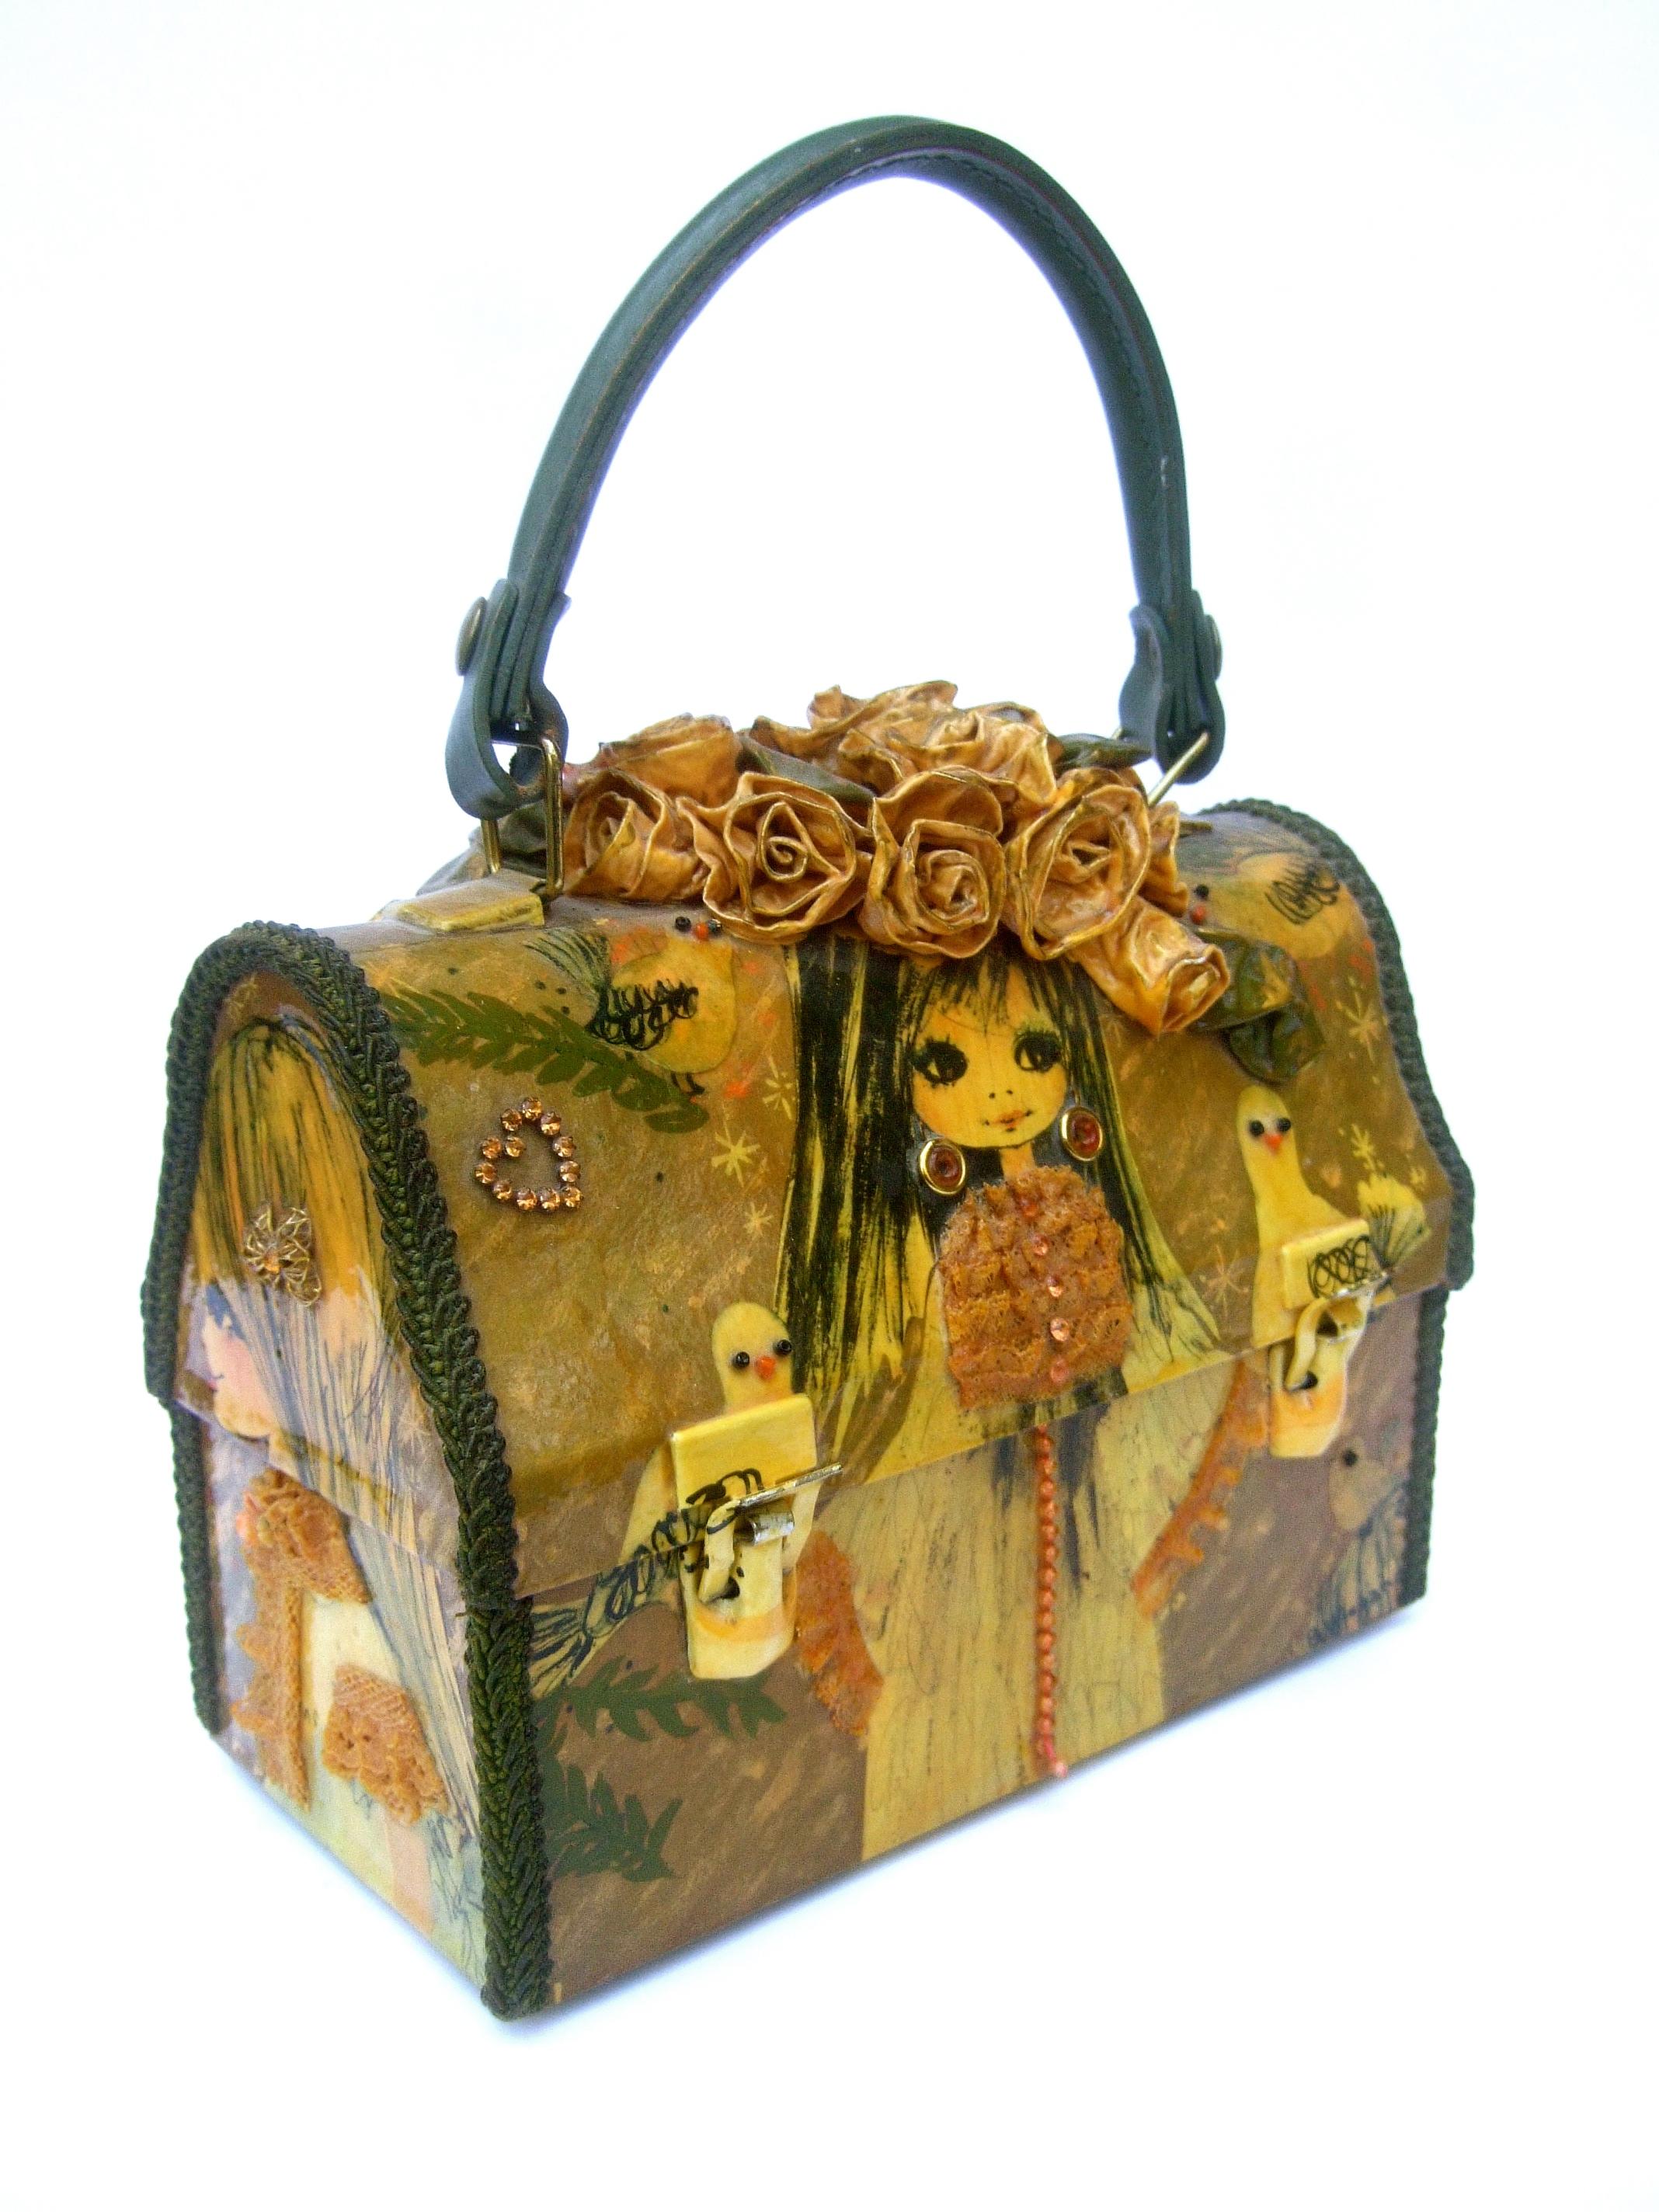 Mod 1960's Quirky decoupage artisan metal lunch box purse 
The unique retro lunch box handbag is decorated with a series of young girls; surrounded by a collection of white dove birds & ballon motifs on all four sides

These handmade quirky artisan